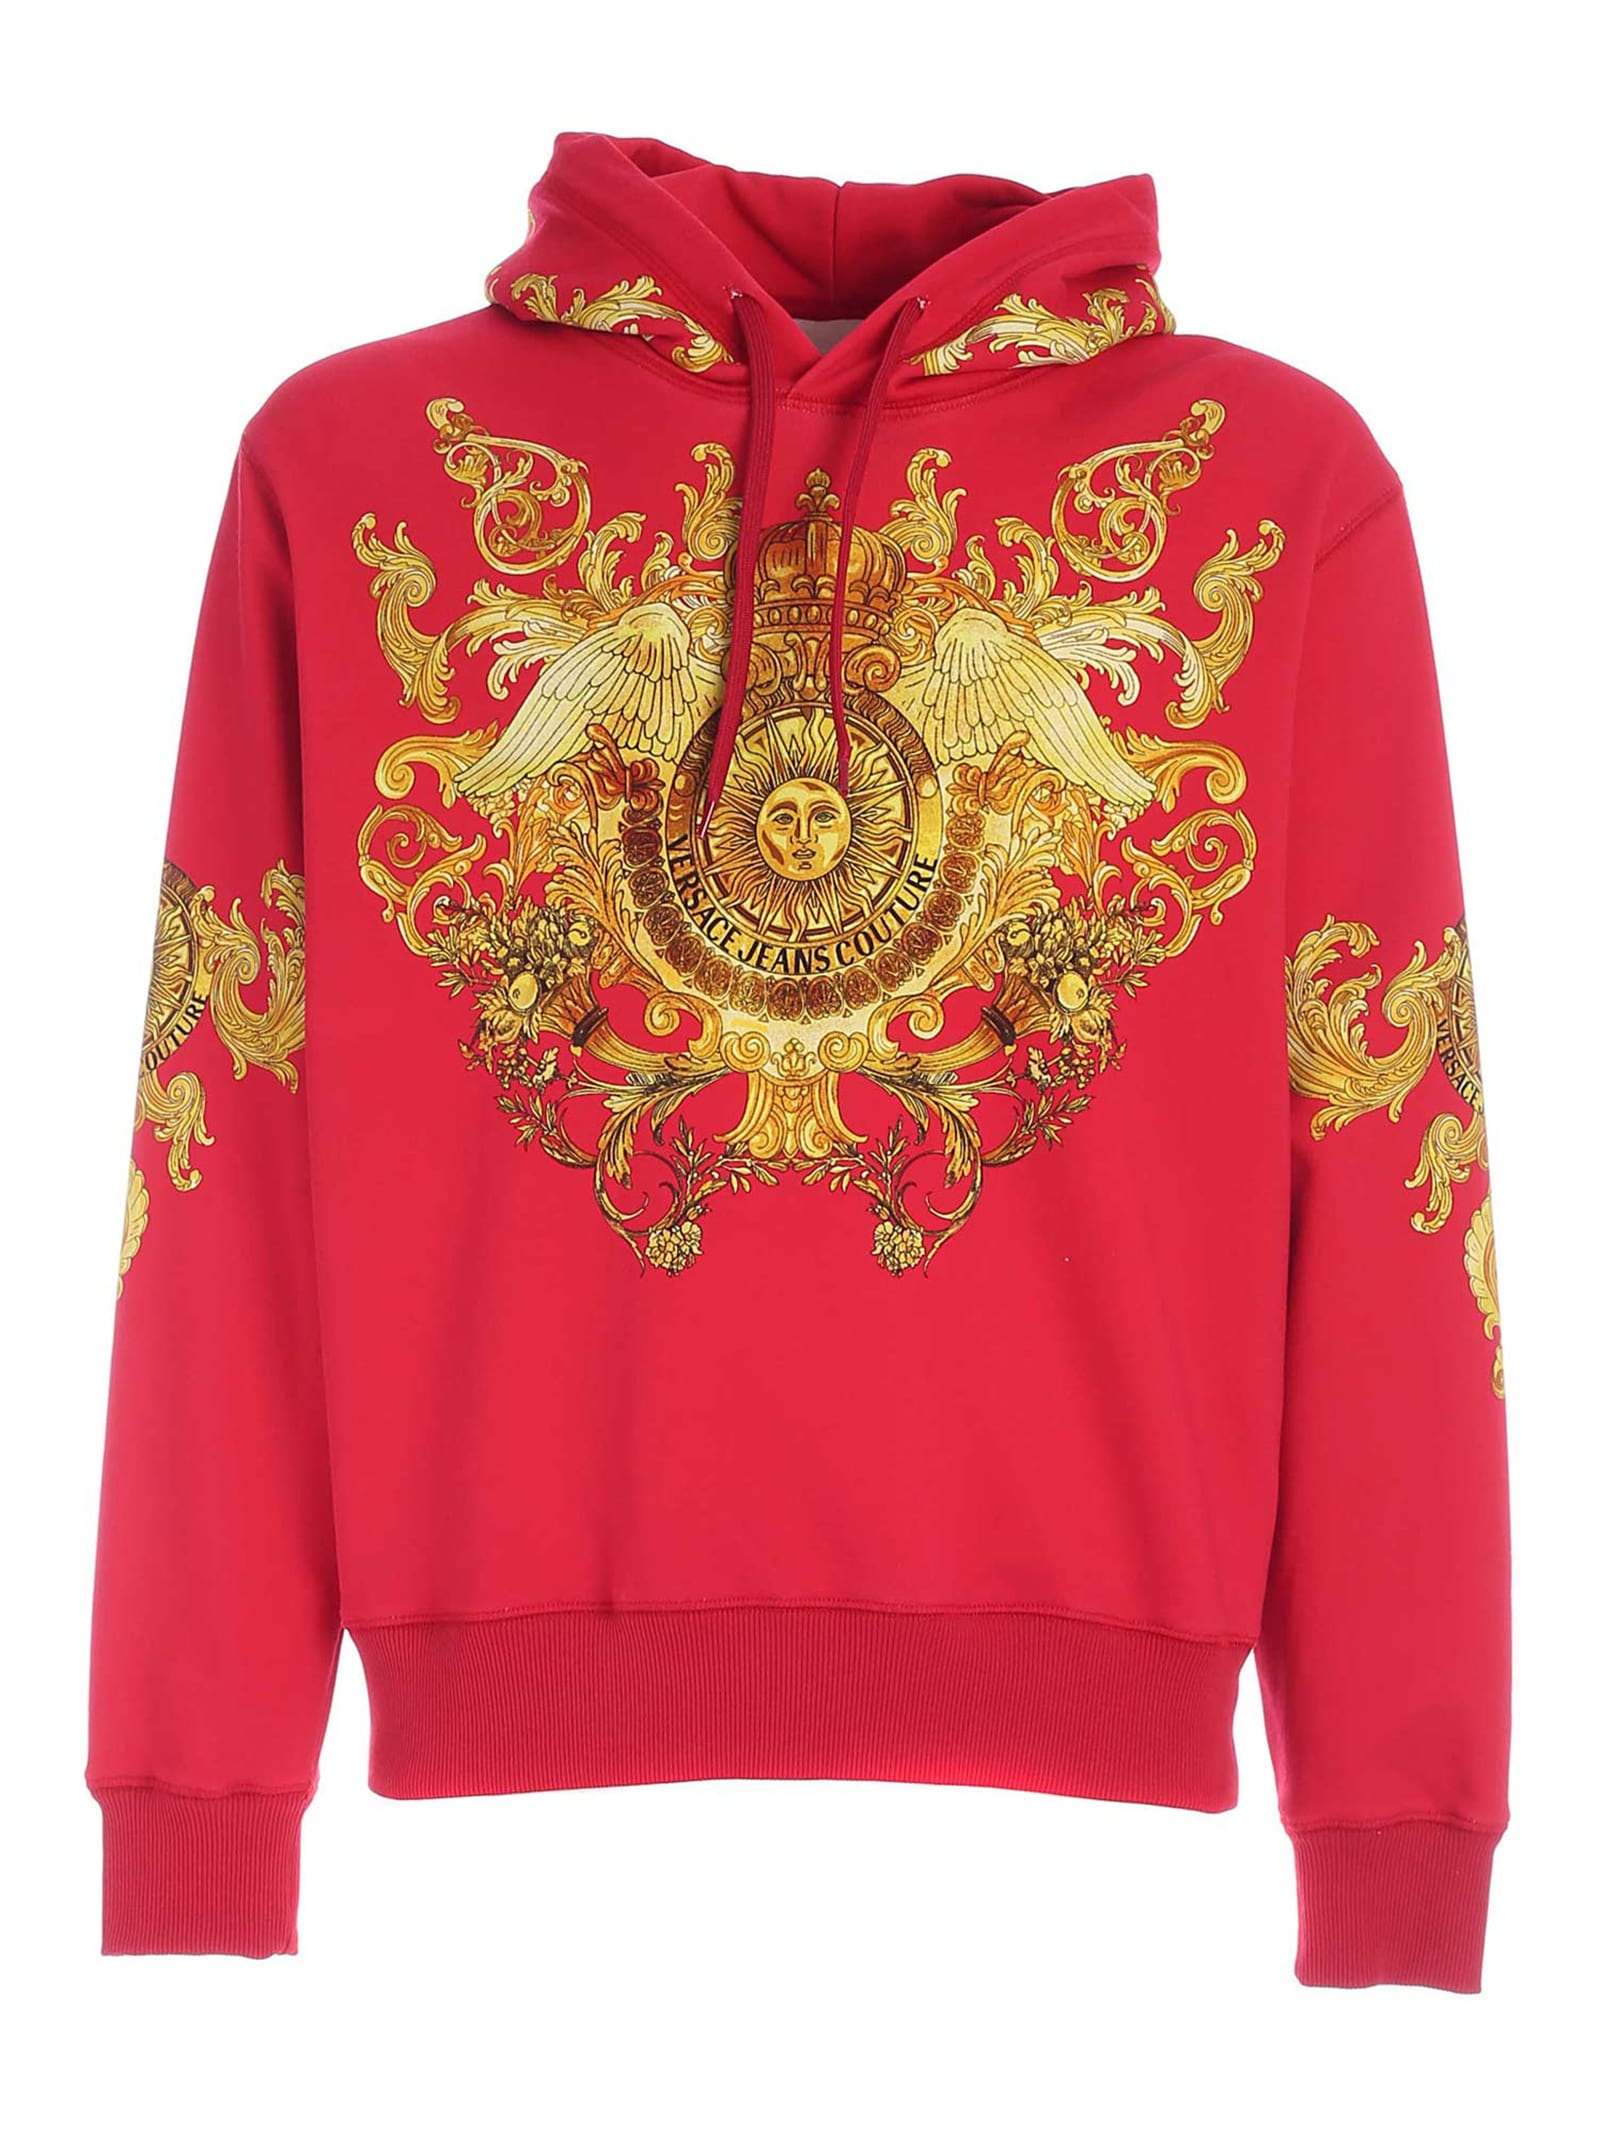 VERSACE JEANS COUTURE ROCOCO PRINT SWEATSHIRT IN RED,B7GWA7F7S0276514